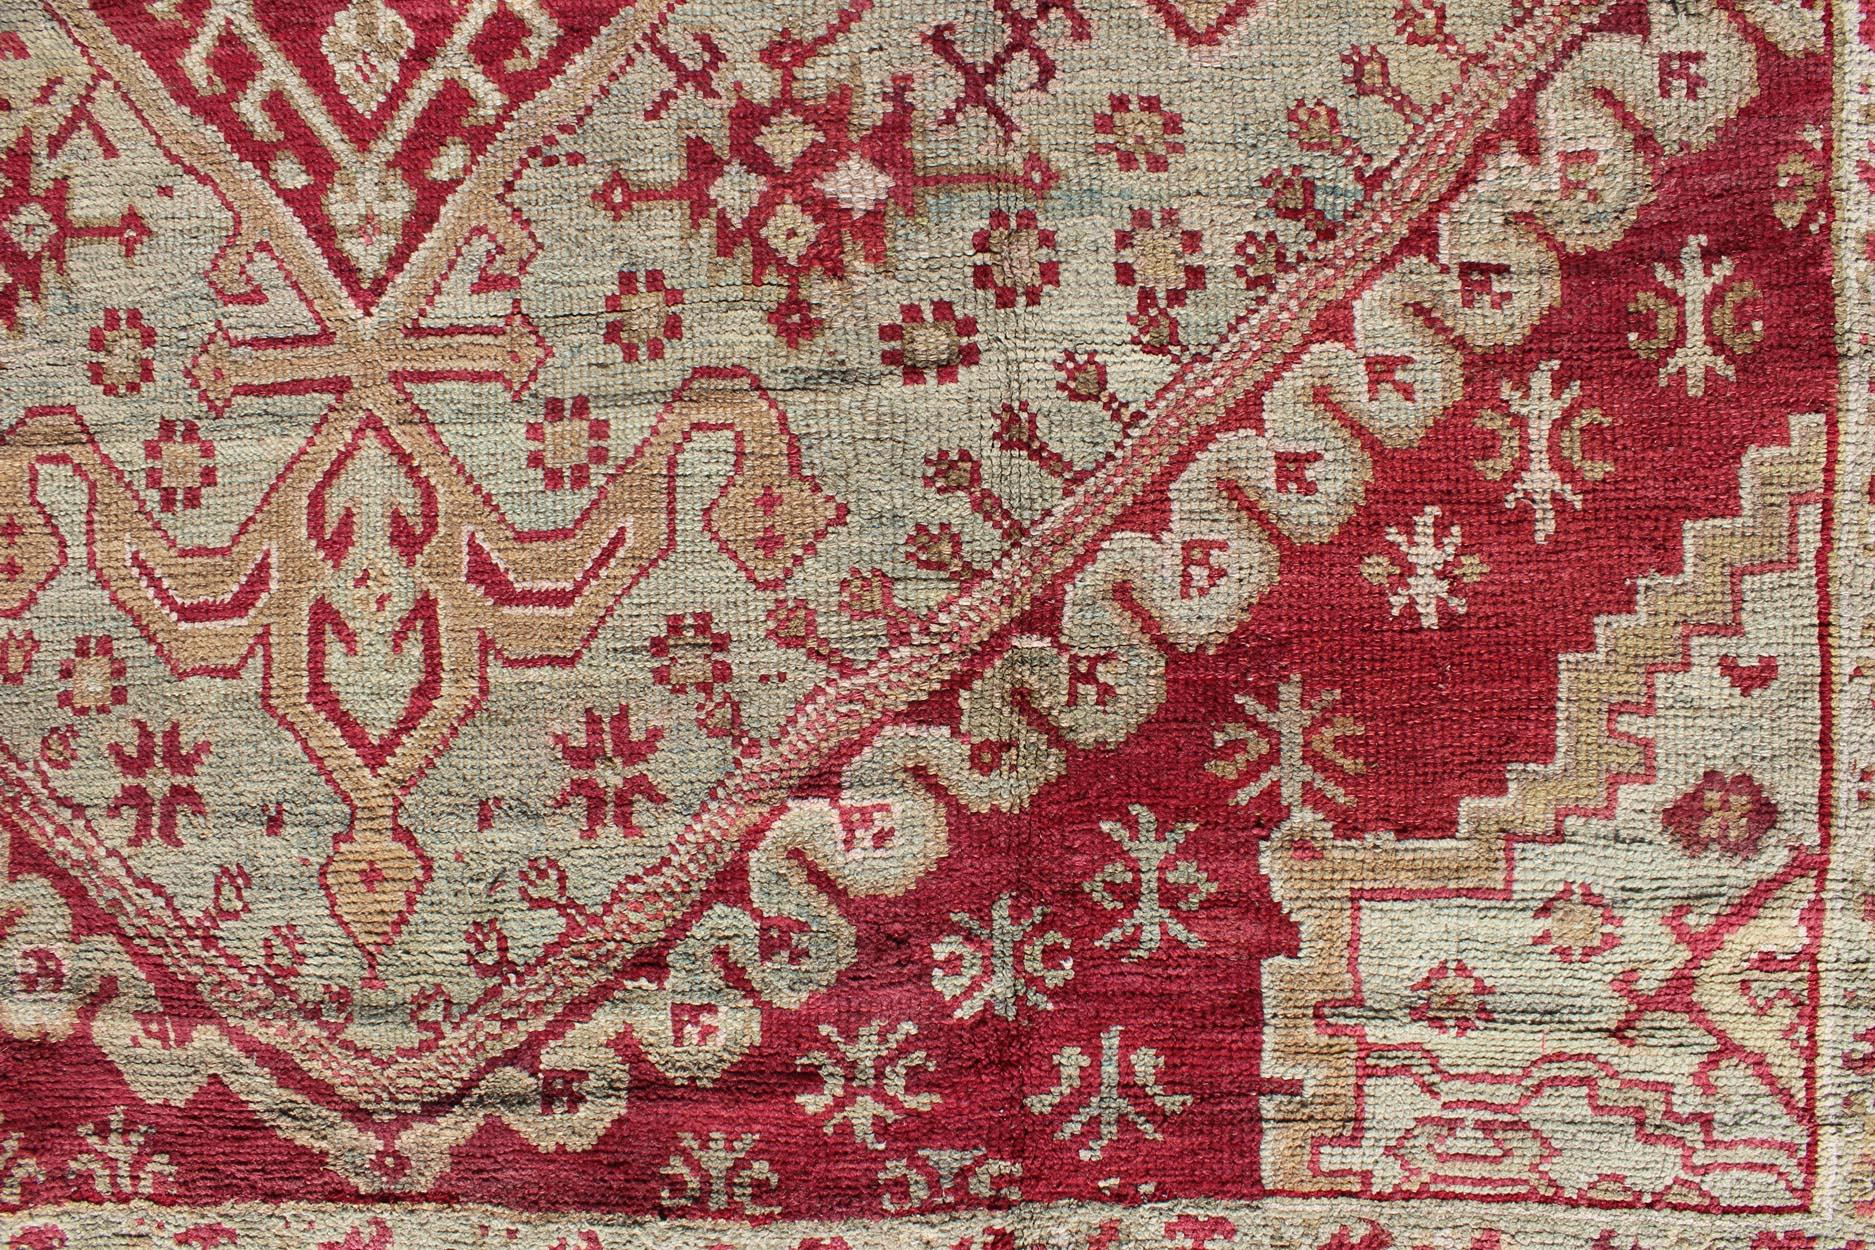 Antique Turkish Ghiordes 19th Century Rug in Raspberry Red, Ice Blue & L. Green For Sale 2